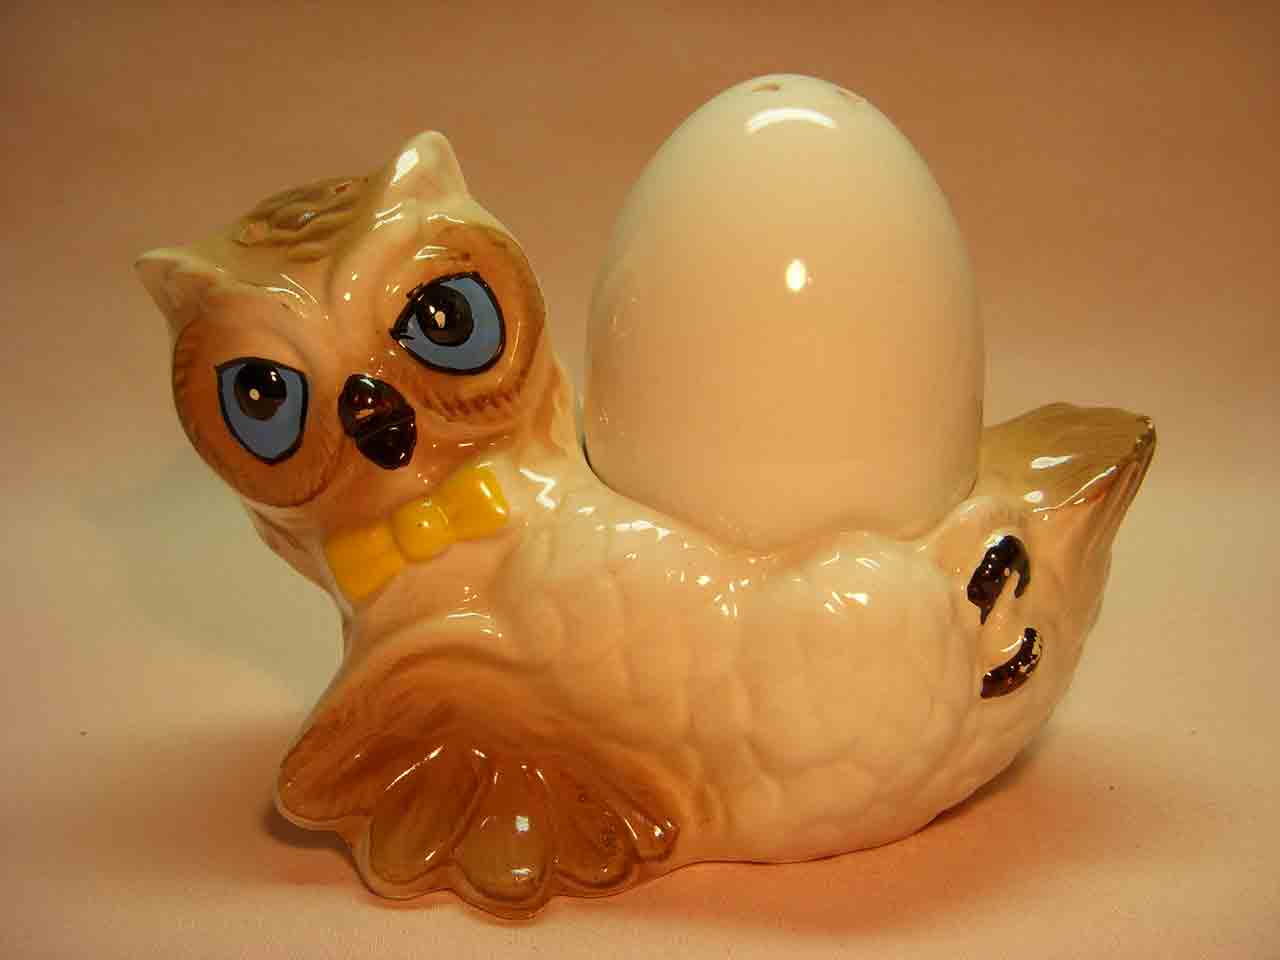 Animals Holding an Egg on Back/Stomach Stackers salt and pepper shakers - owl